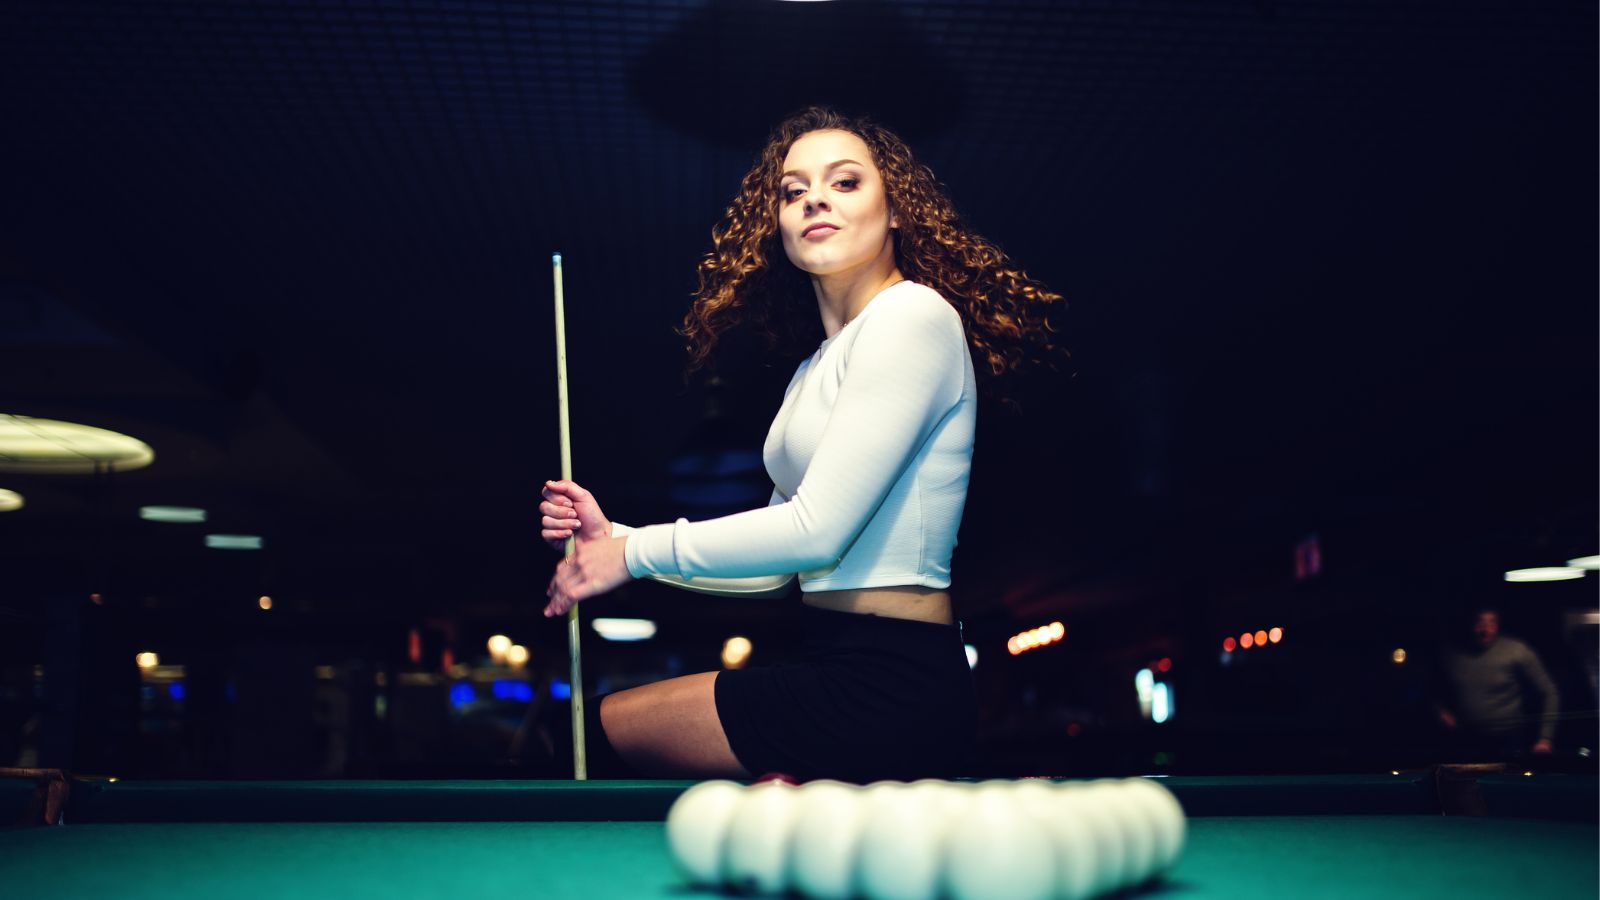 “Women’s Sport Is Under Siege From Transgender Players”: Pool Player Walks Away From the Table Rather Than Compete Against Trans Woman